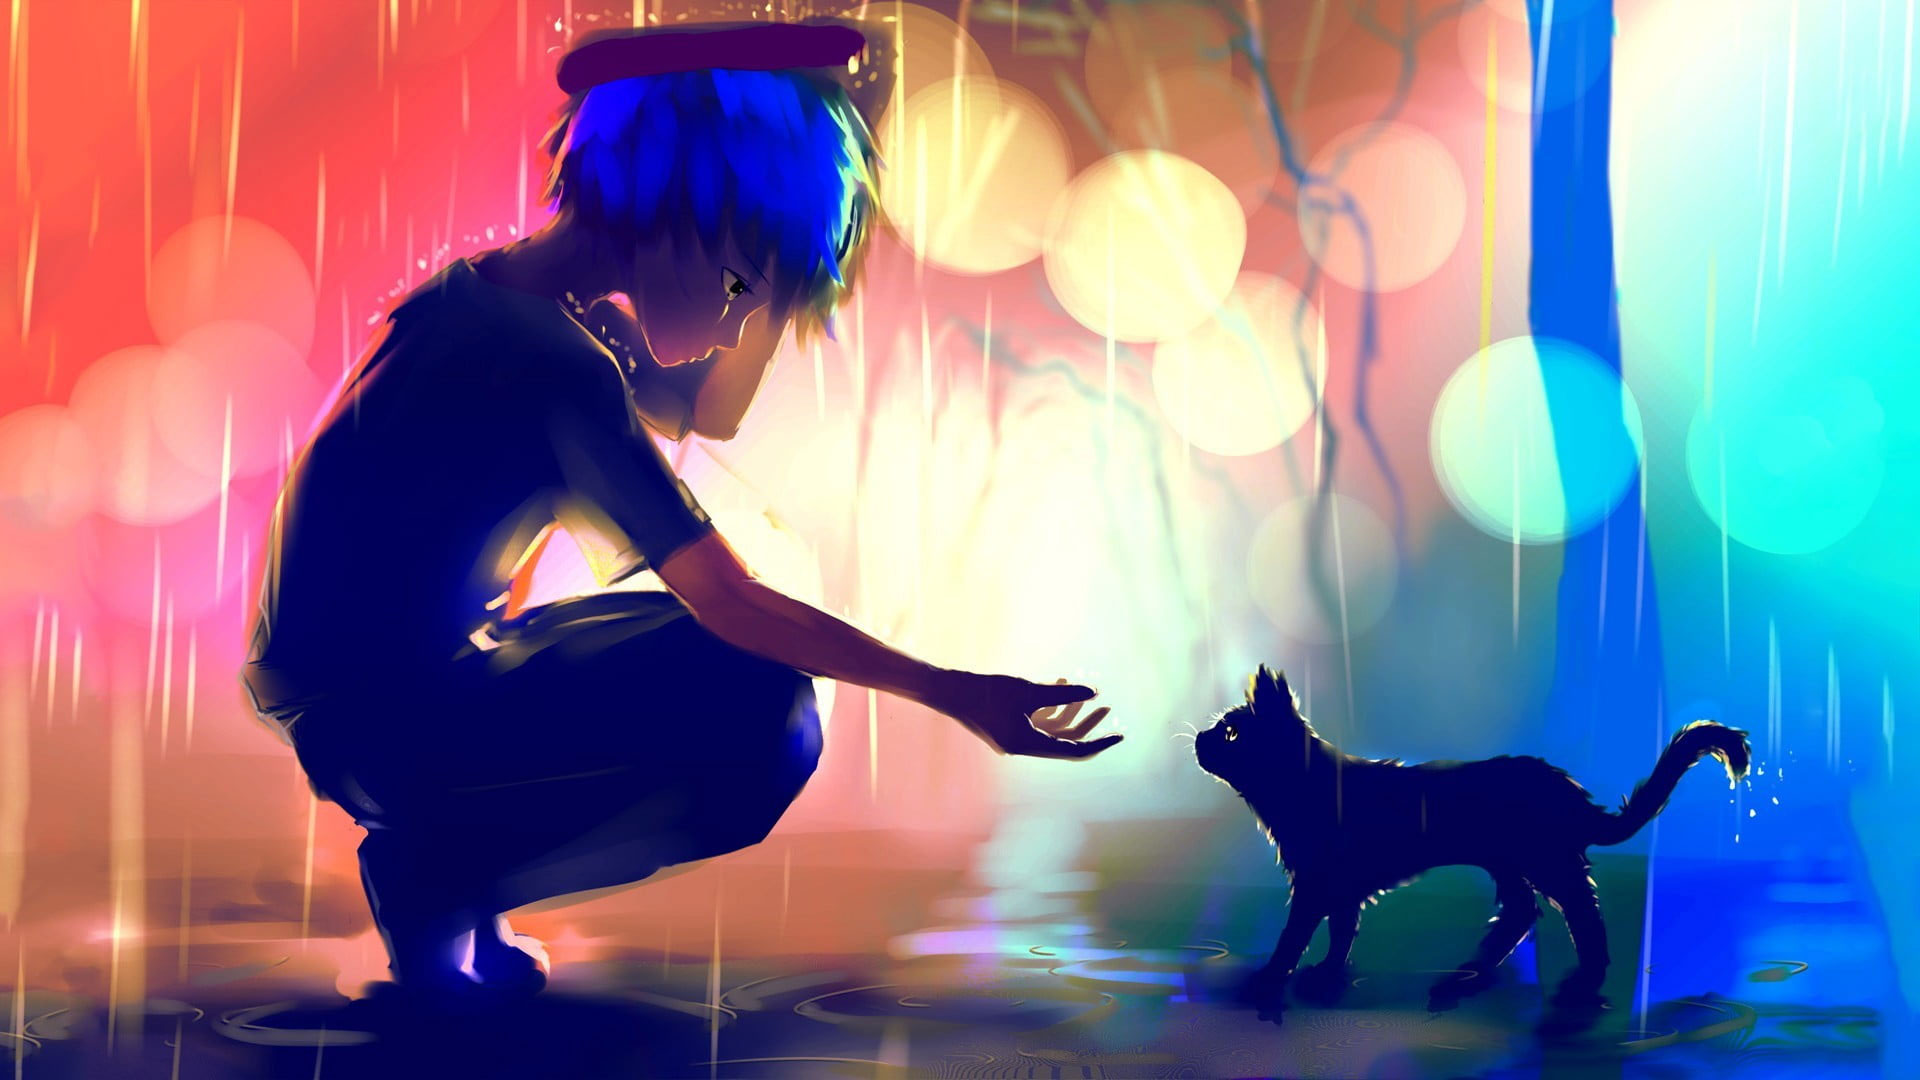 Boy in the rain about to hold the cat digital wallpaper, blue haired anime boy painting